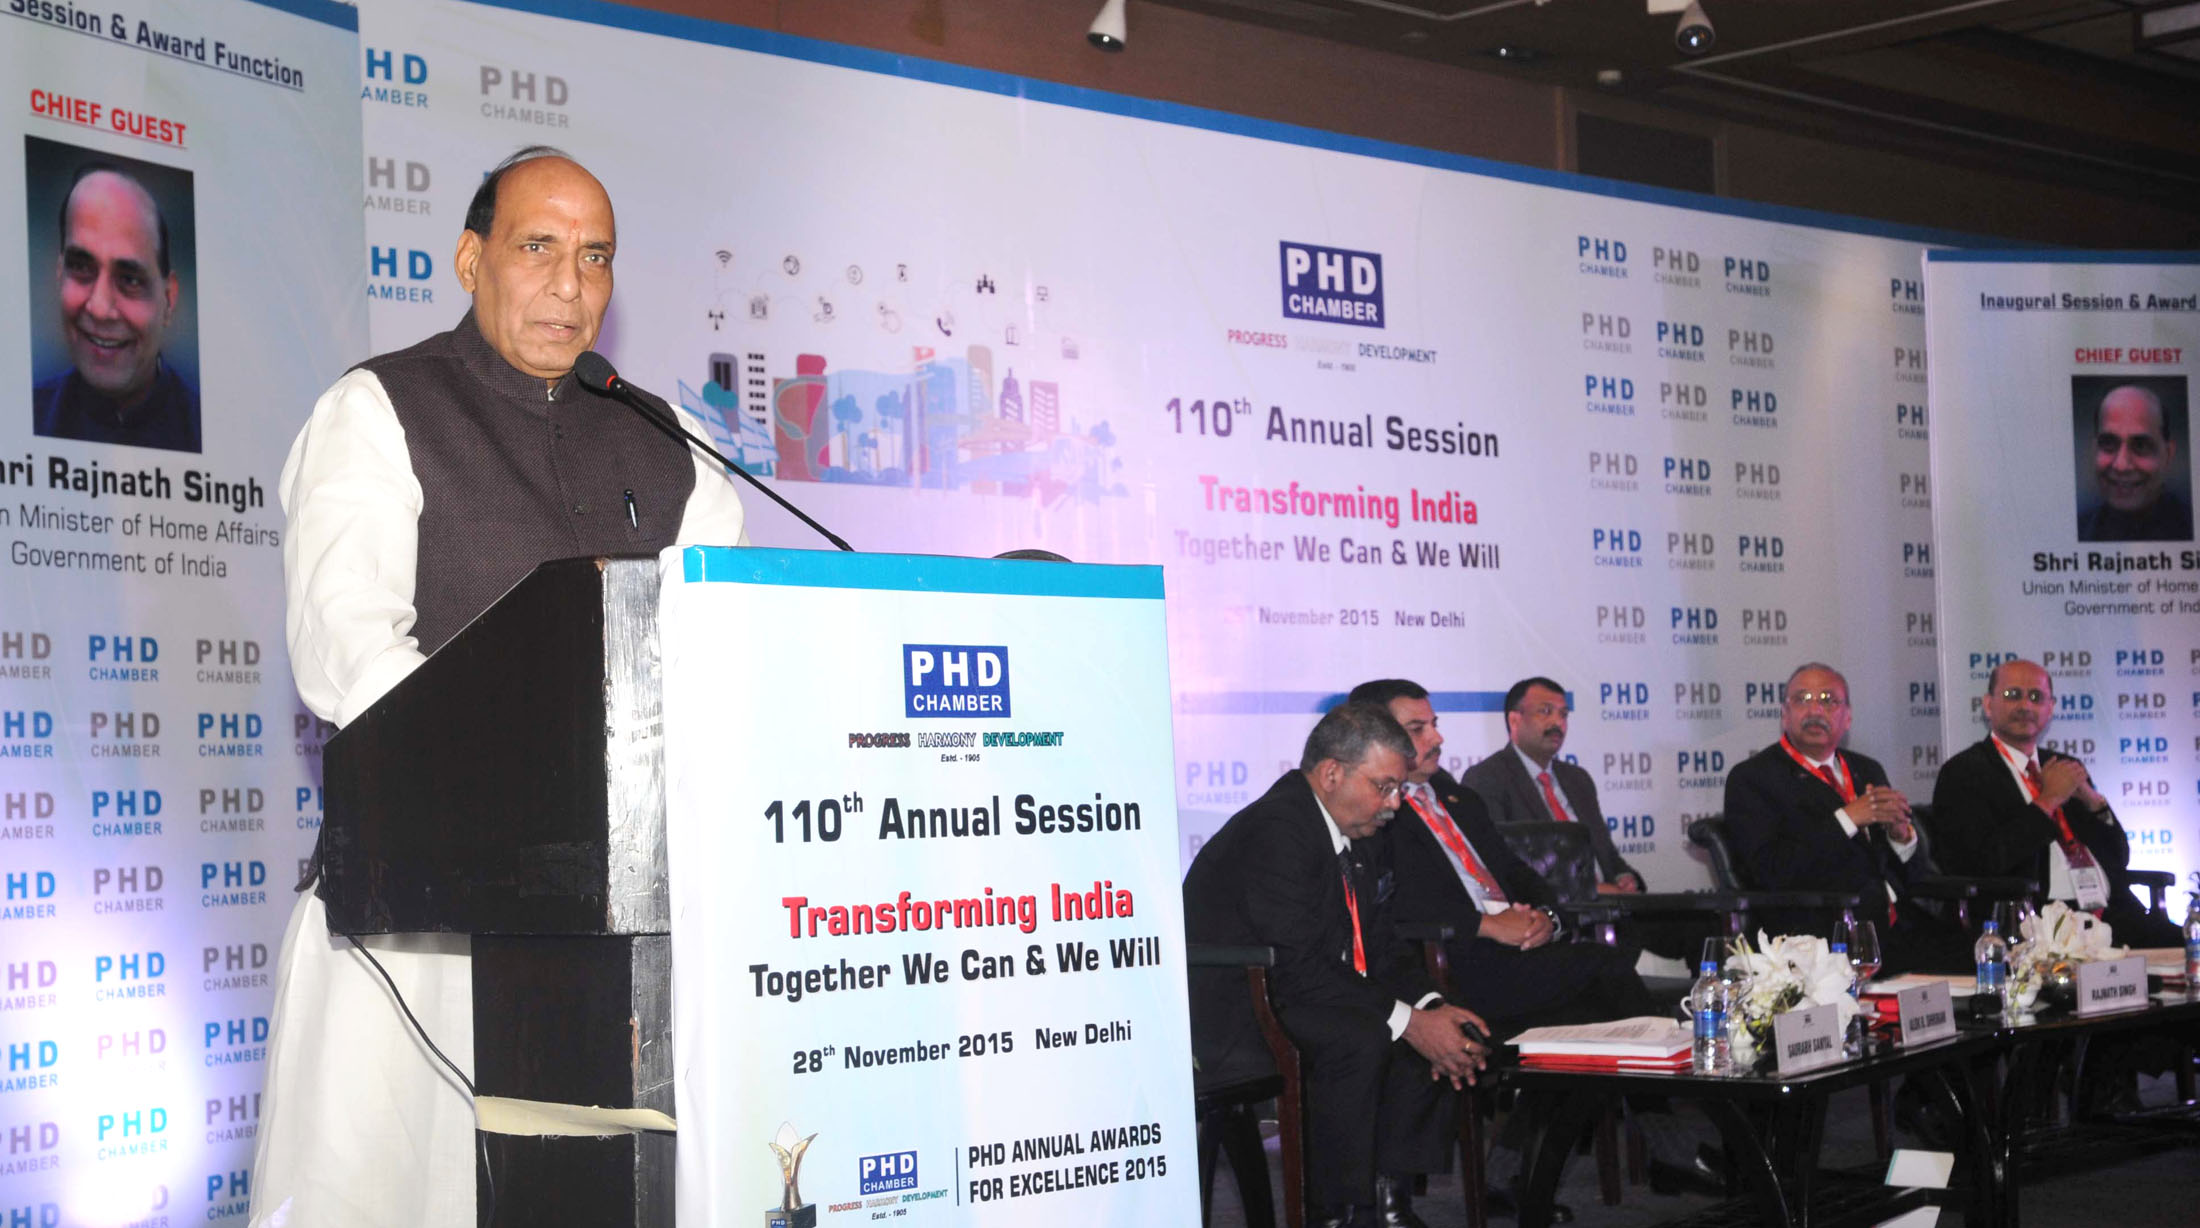 The Union Home Minister, Shri Rajnath Singh addressing at the inauguration of the 110th Annual Session of the PHD Chamber and PHD Annual Awards for Excellence  2015 function, in New Delhi on November 28, 2015.